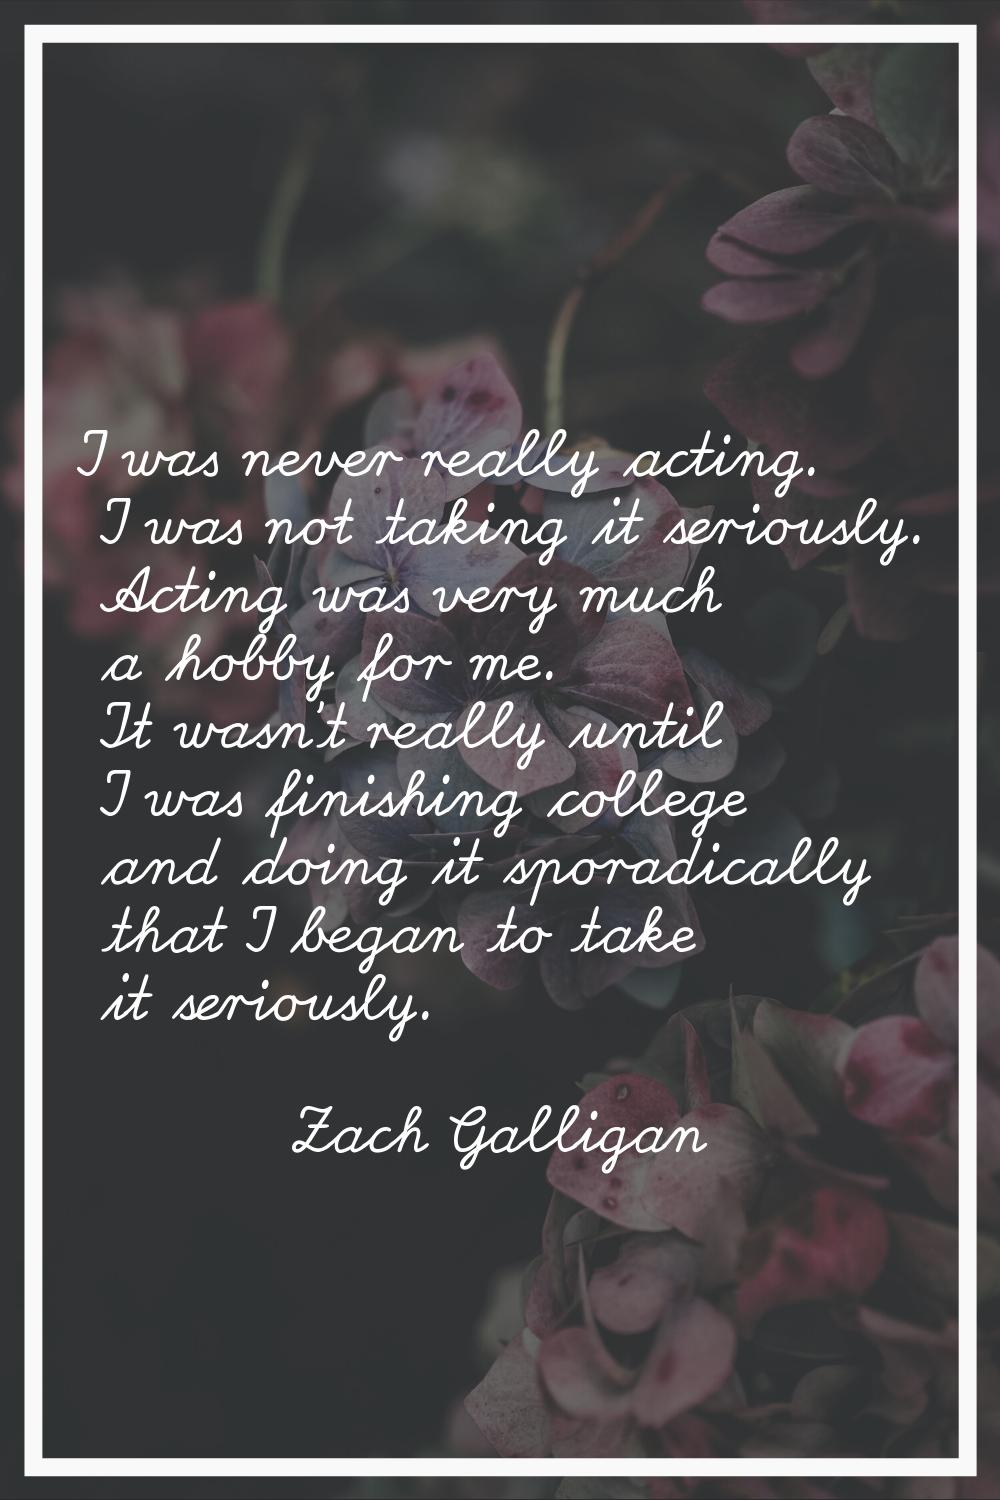 I was never really acting. I was not taking it seriously. Acting was very much a hobby for me. It w